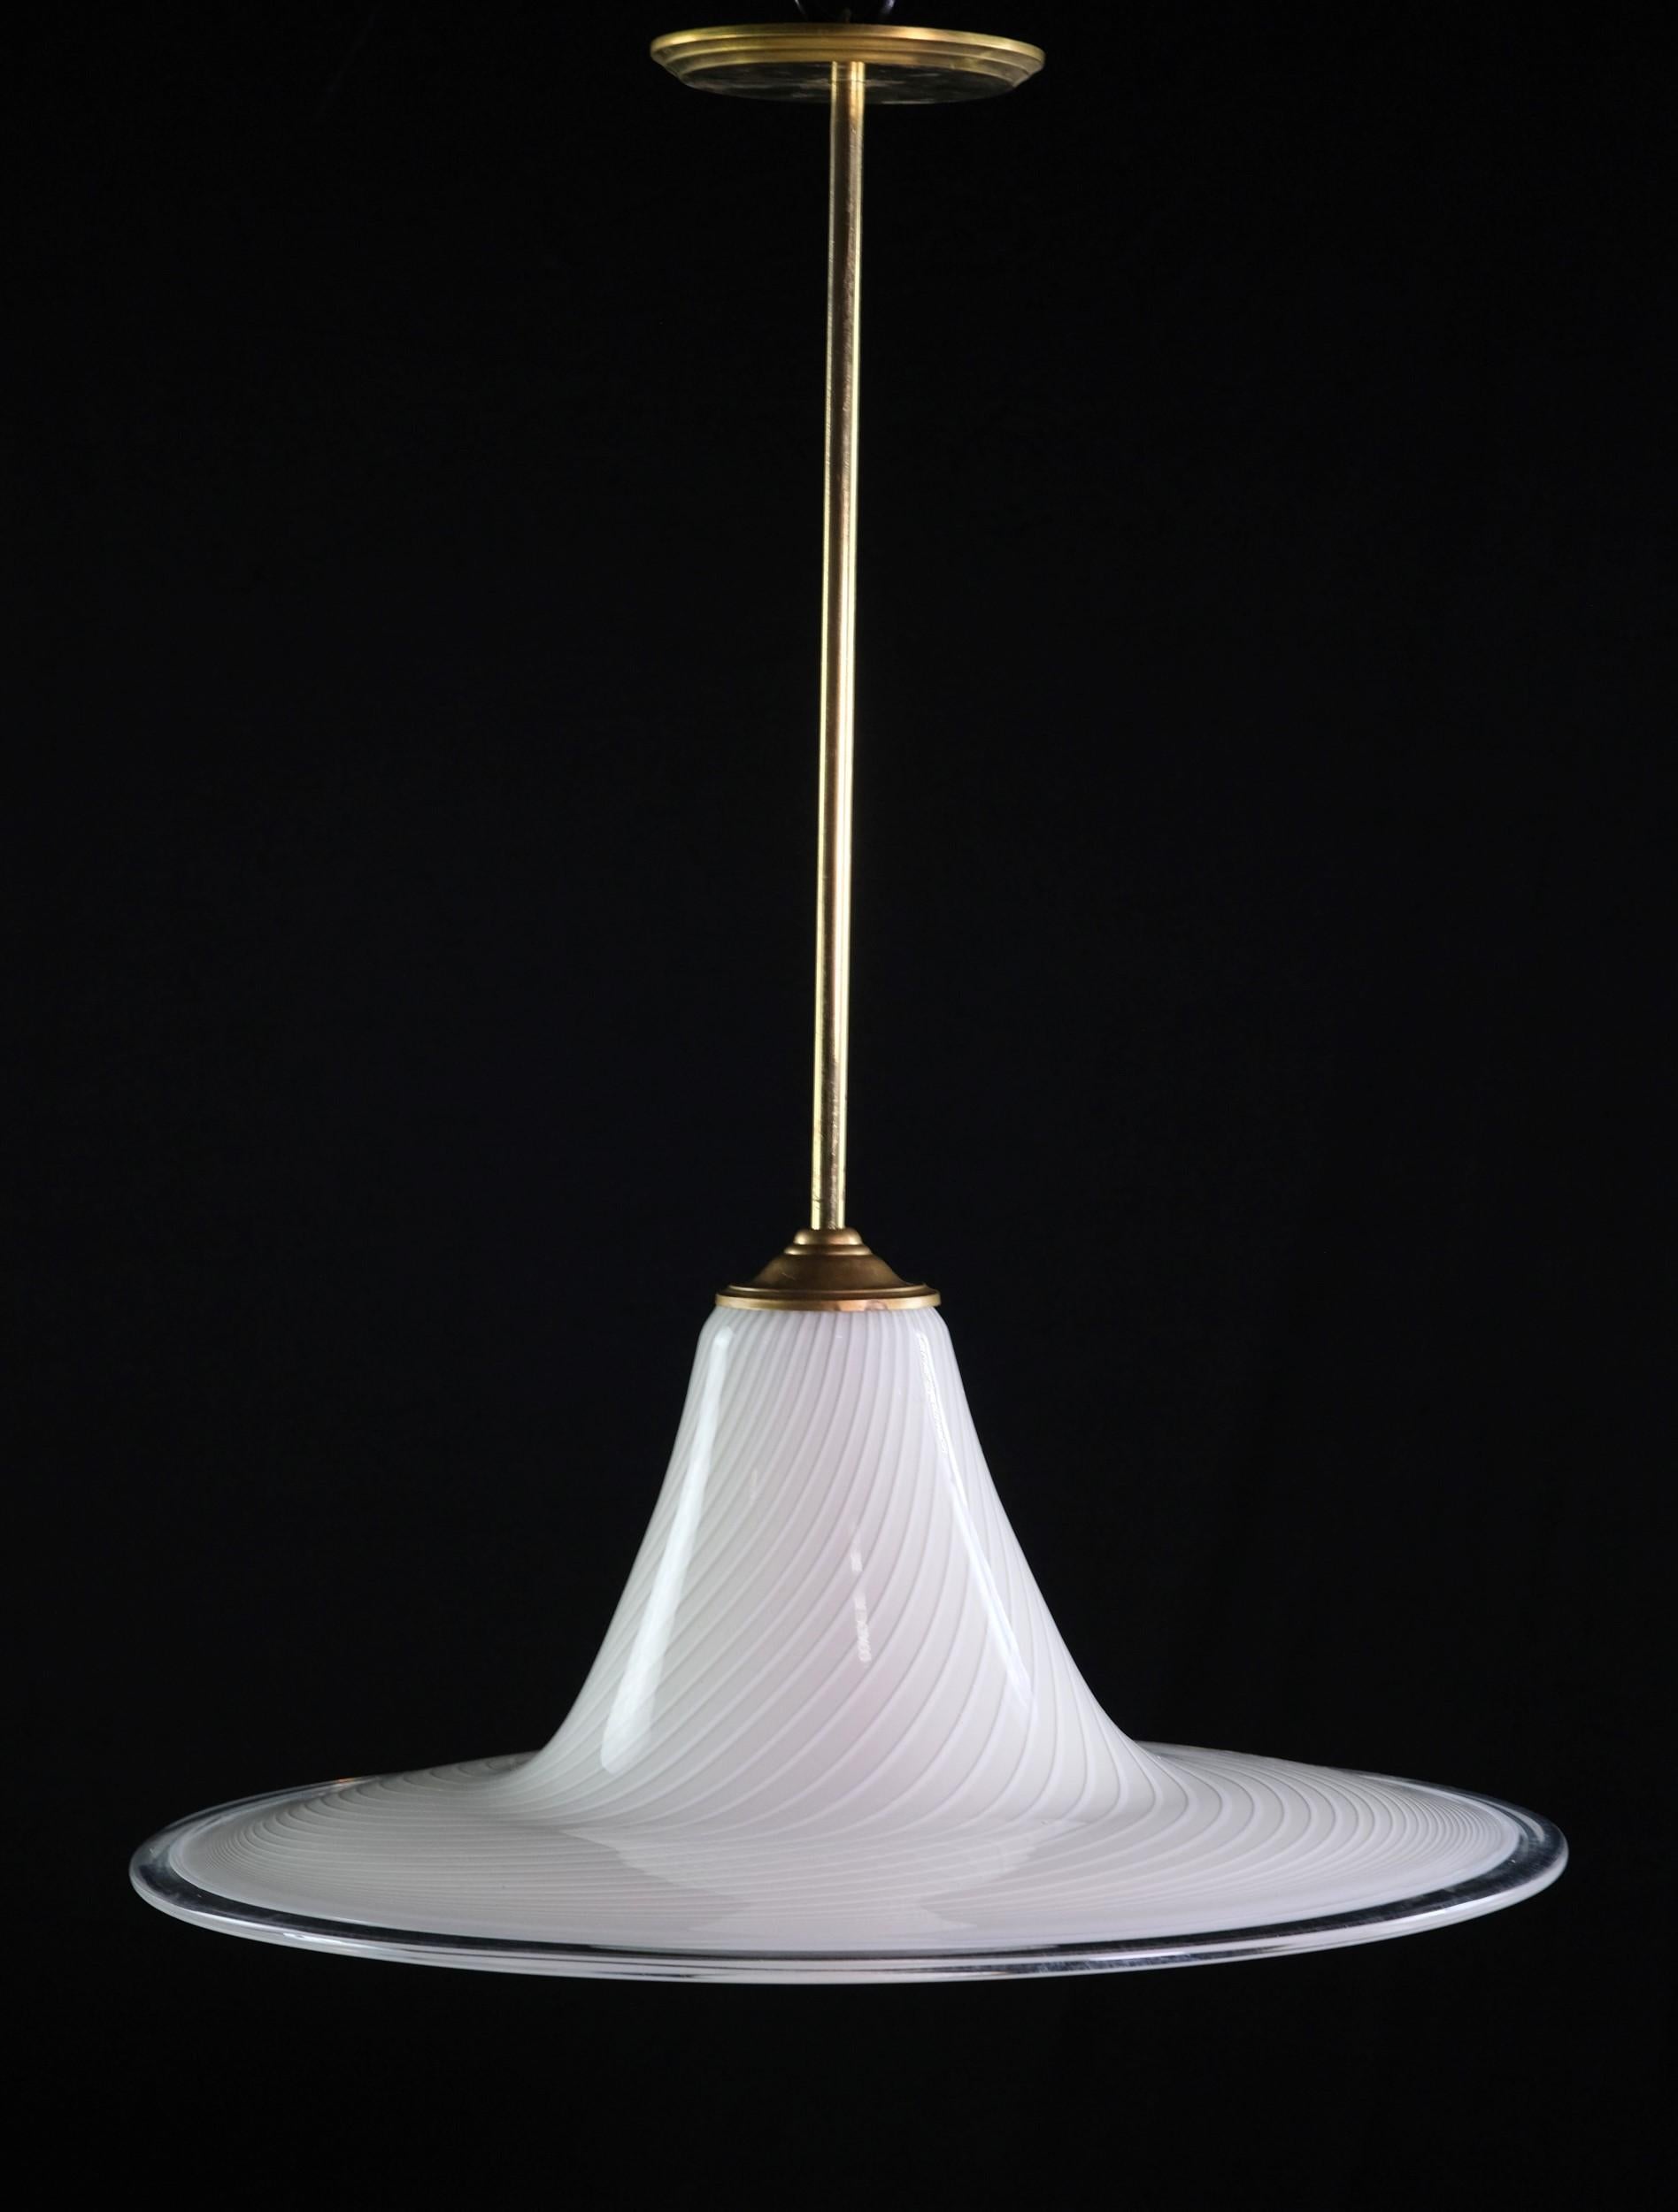 Italian made, Vetri Murano hand blown white swirled glass shade with brass pole newly wired fitter. The shade has a clear glass rim and the fitter has a porcelain socket. The glass was hand blown in Italy. Small quantity available at time of